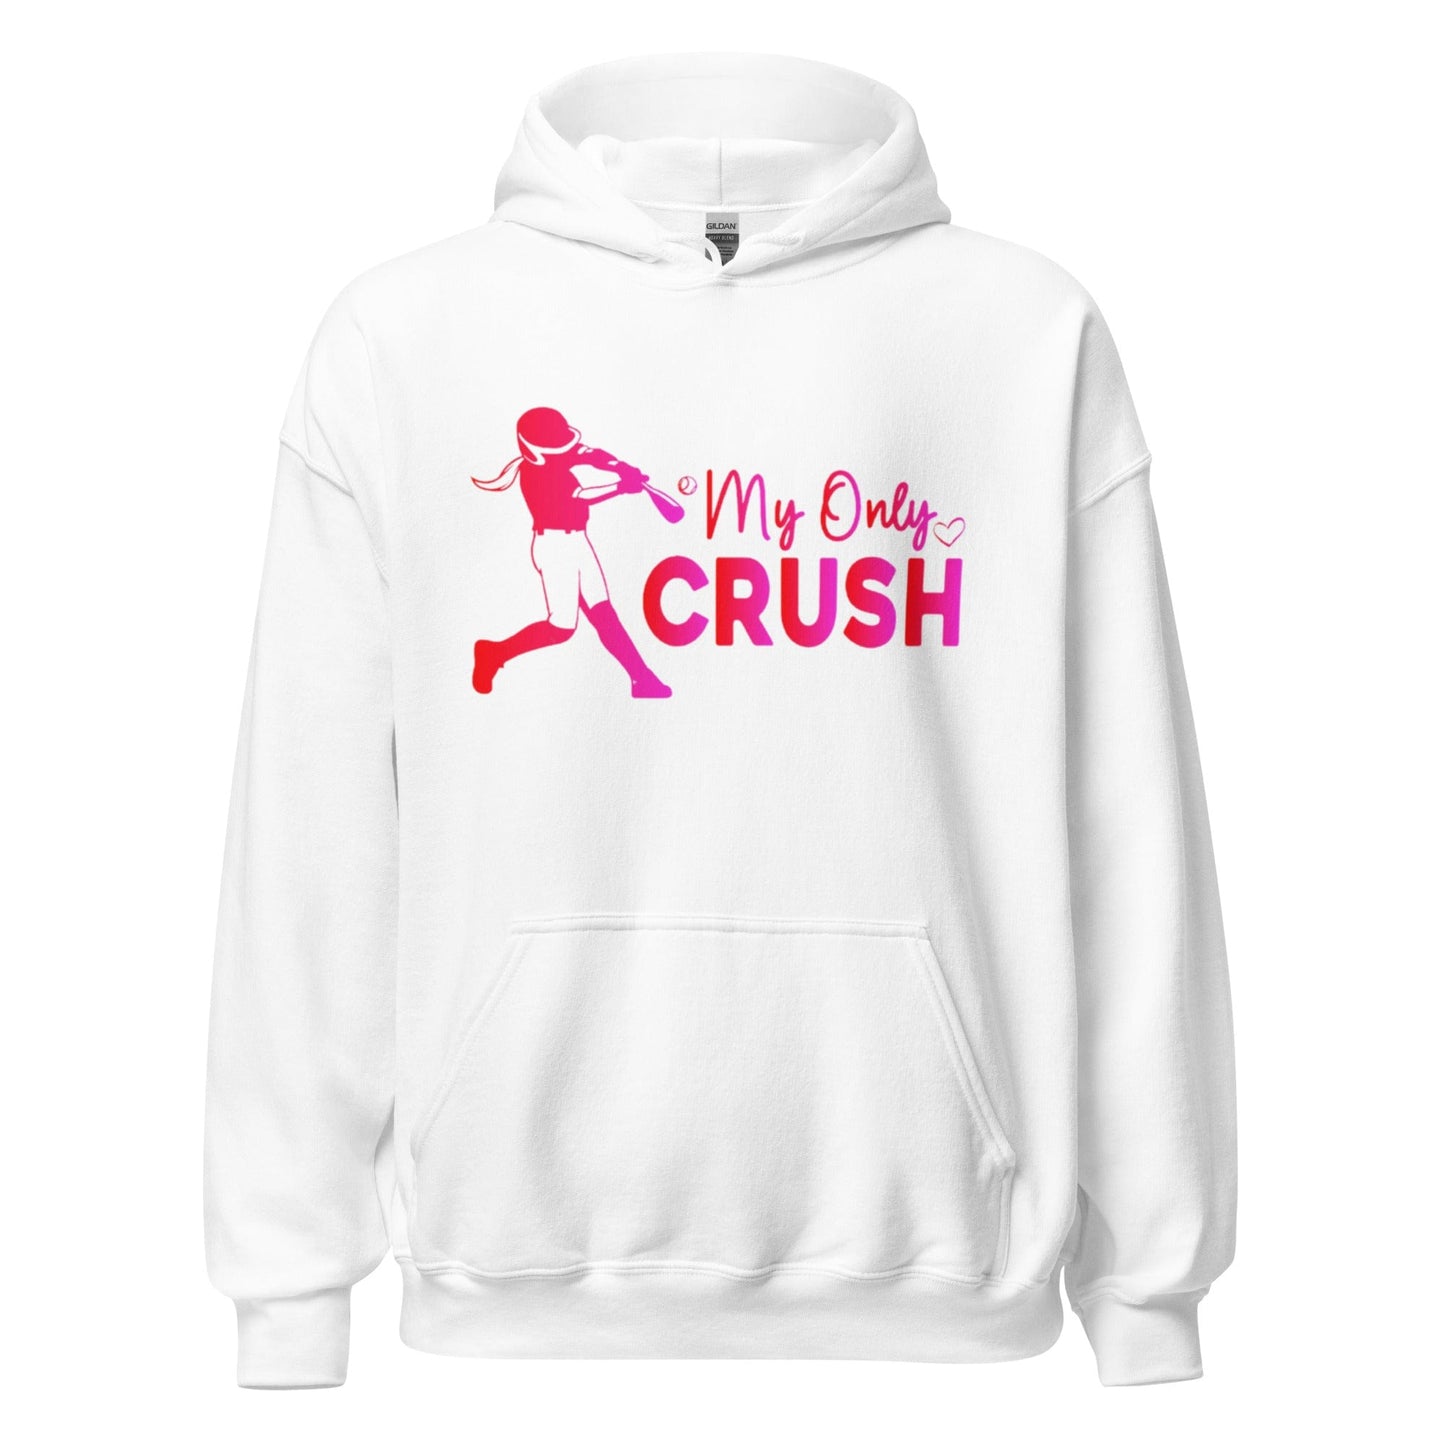 My Only Crush - Adult Hoodie